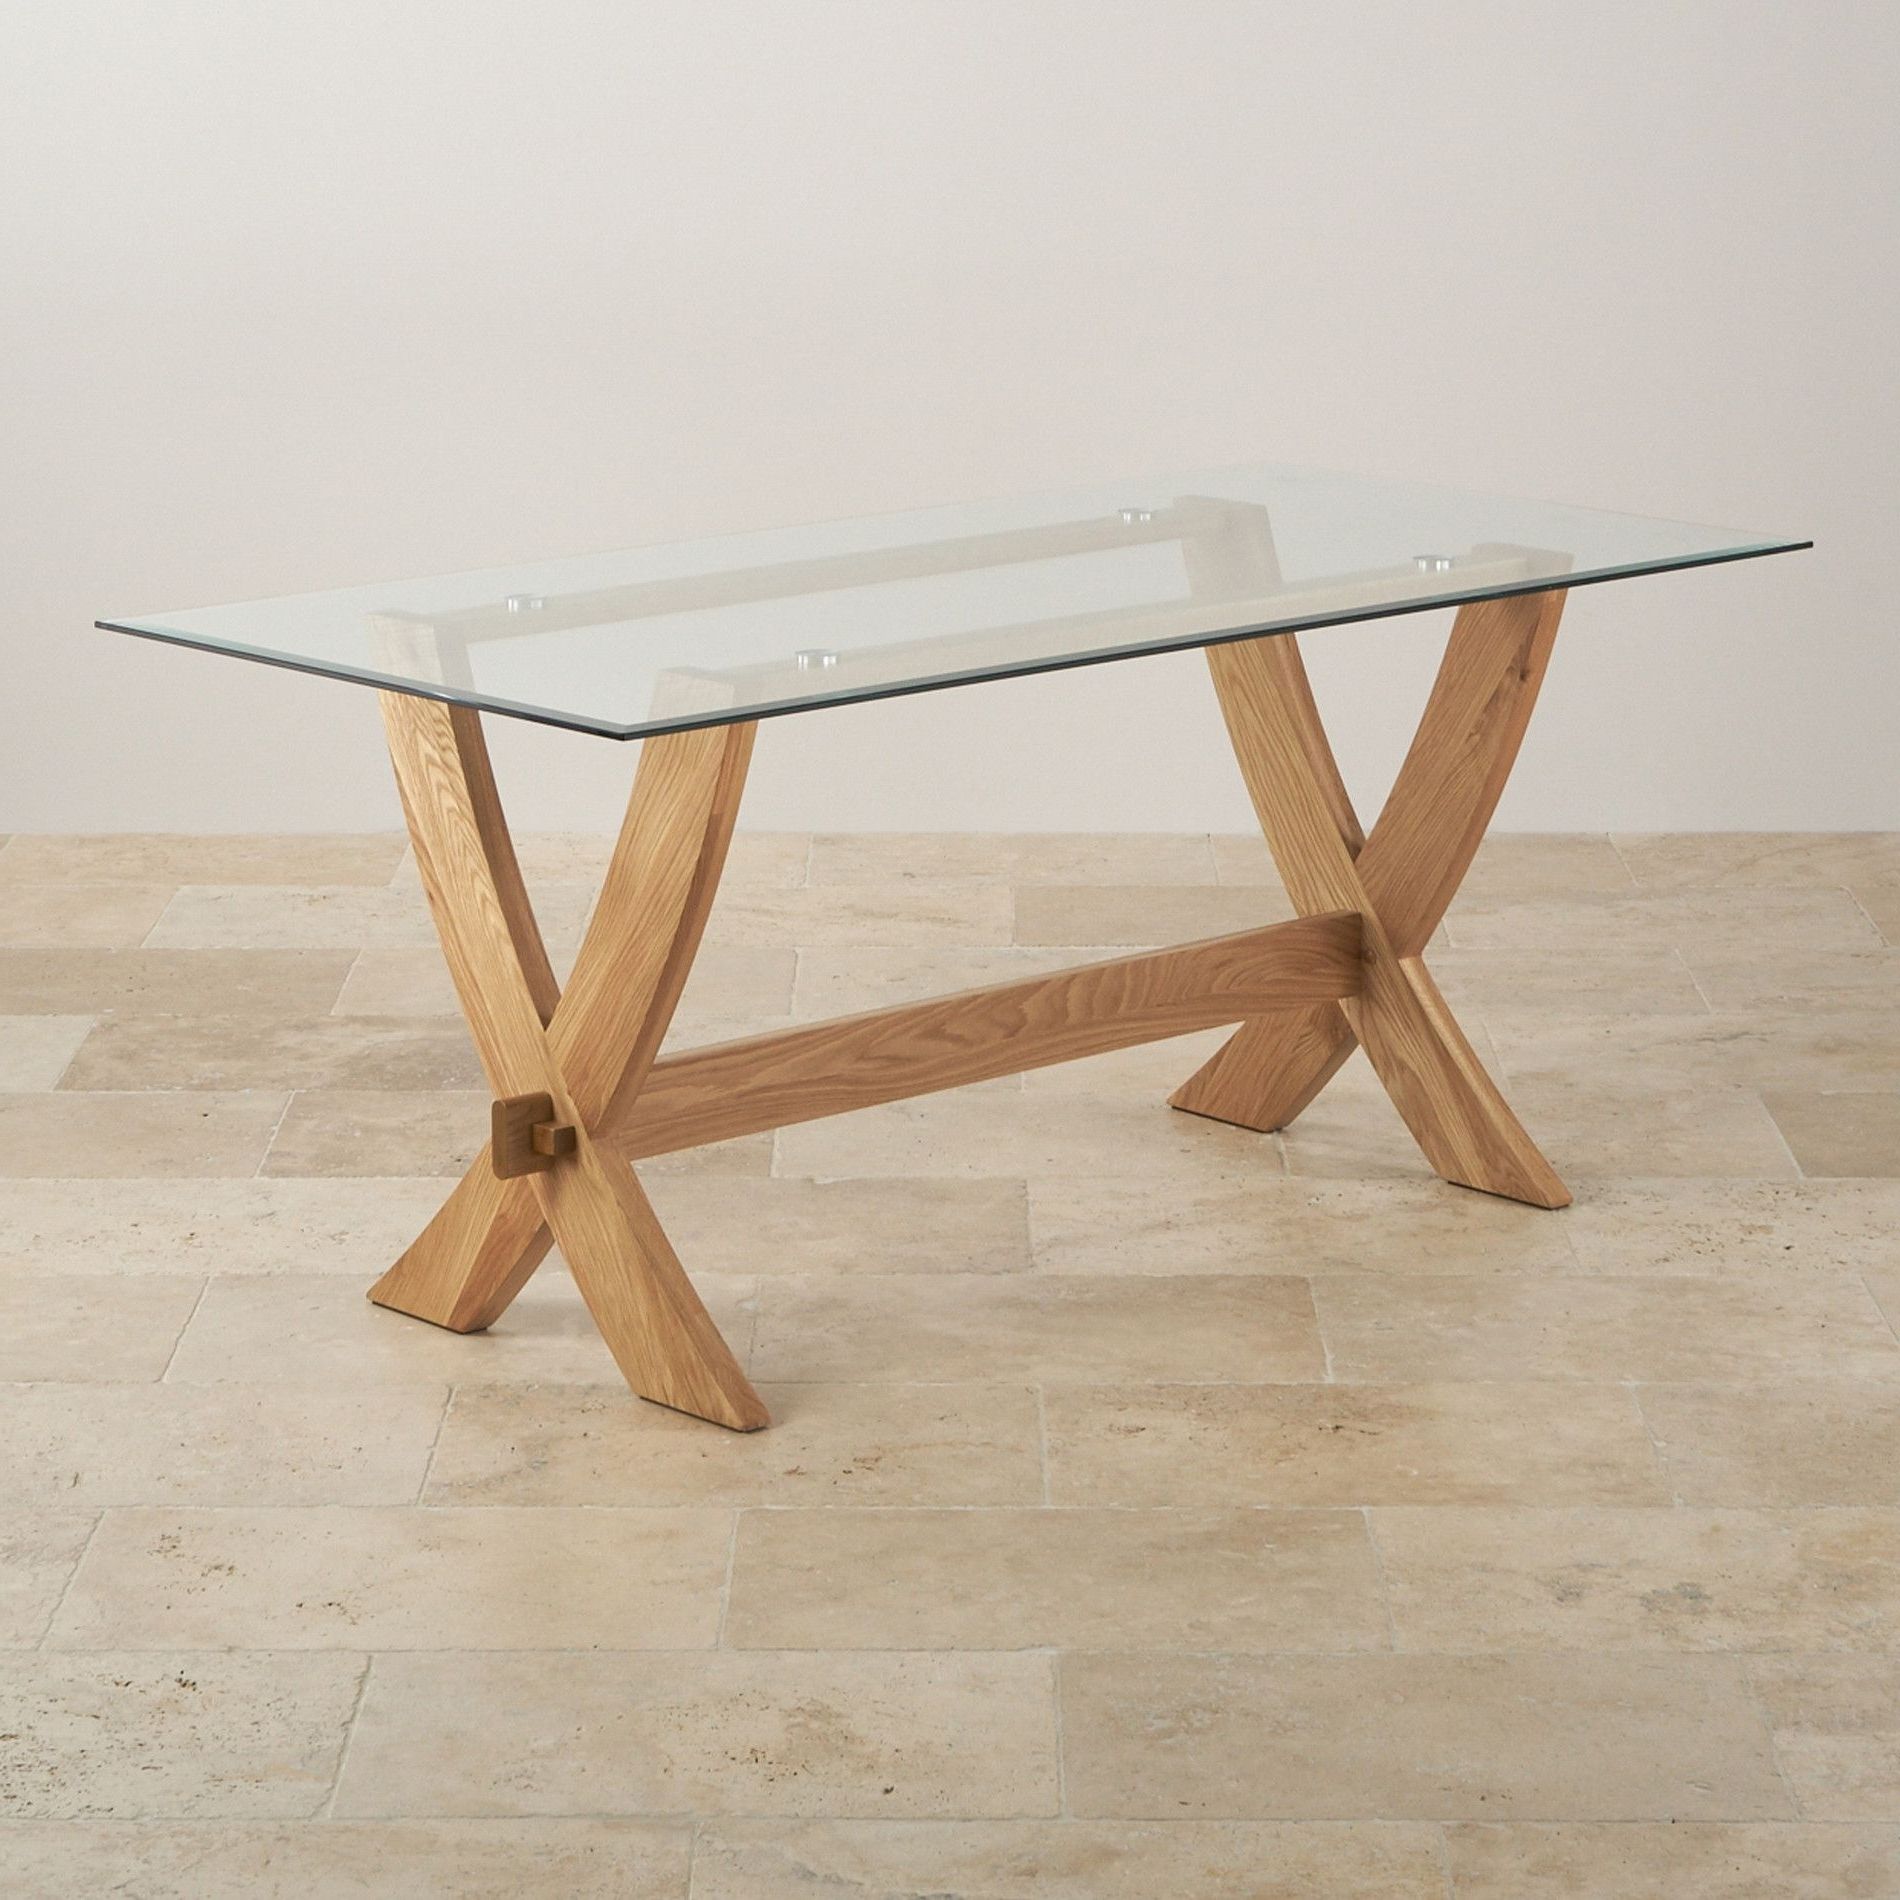 Newest Glass Oak Dining Tables For Reflection Glass Top And Natural Solid Oak 6ft X 3ft Crossed Leg (View 5 of 25)